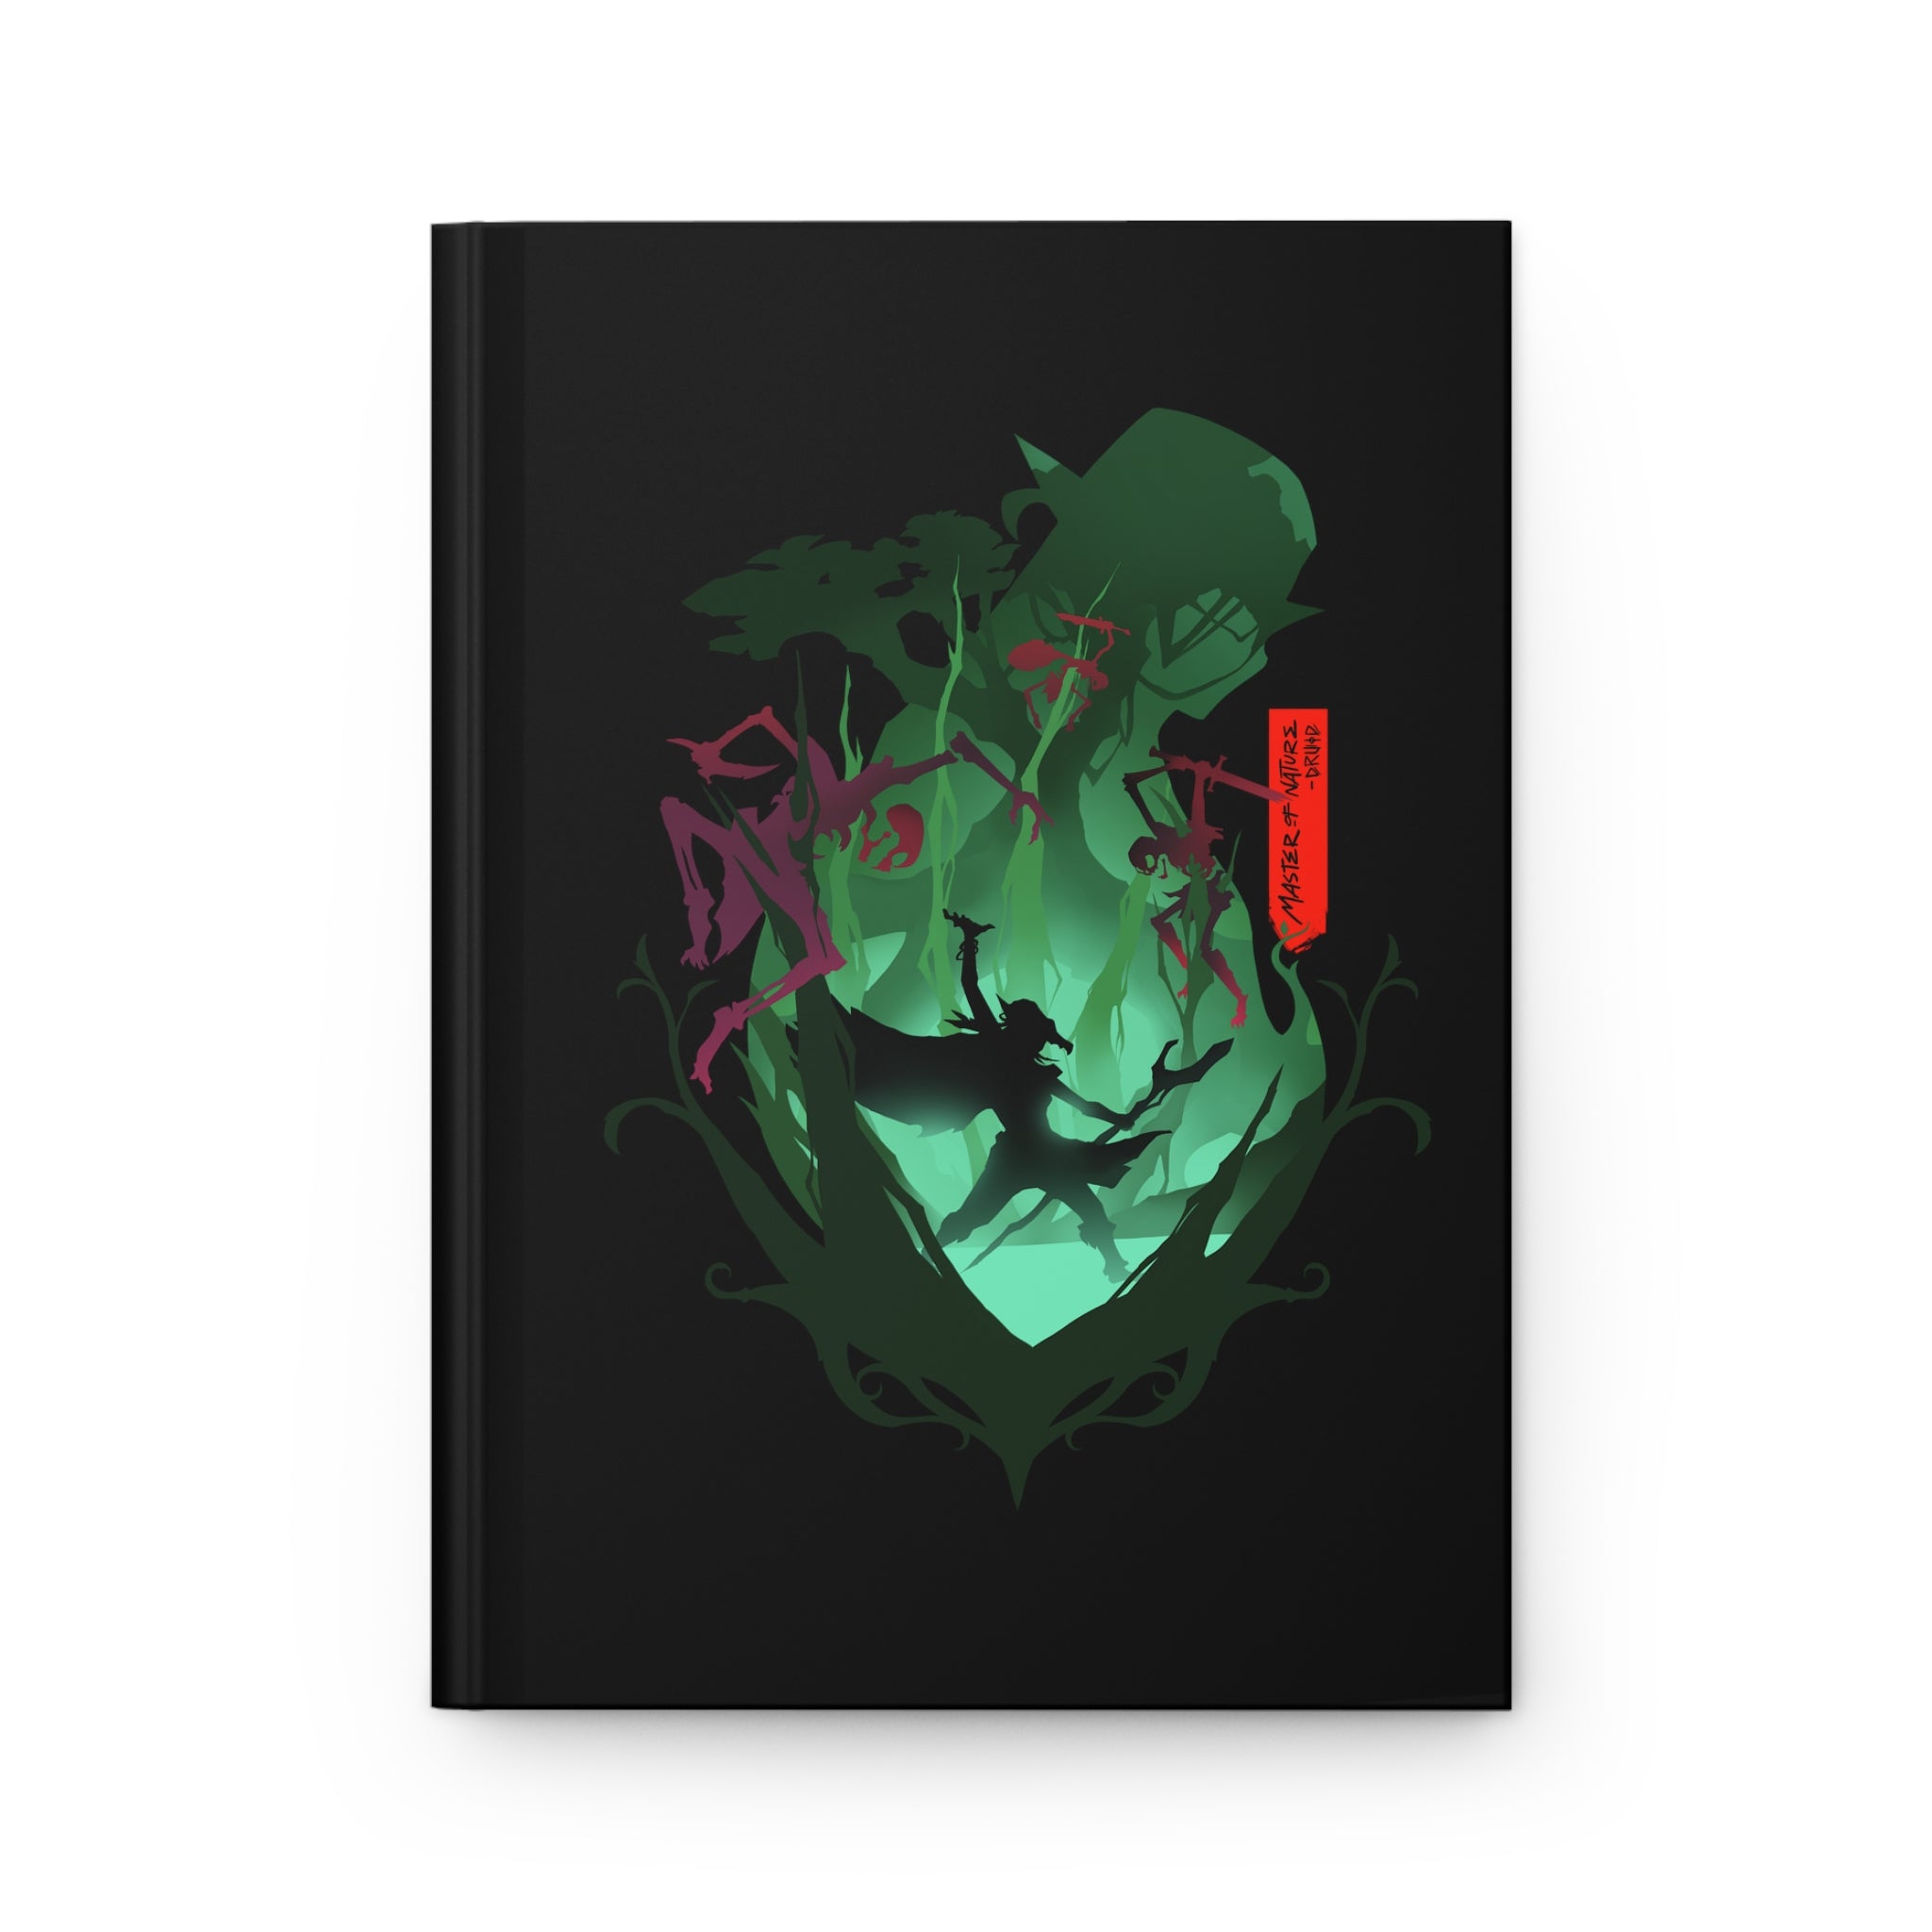 DRUID CLASS SILHOUETTE HARDCOVER CAMPAIGN JOURNAL